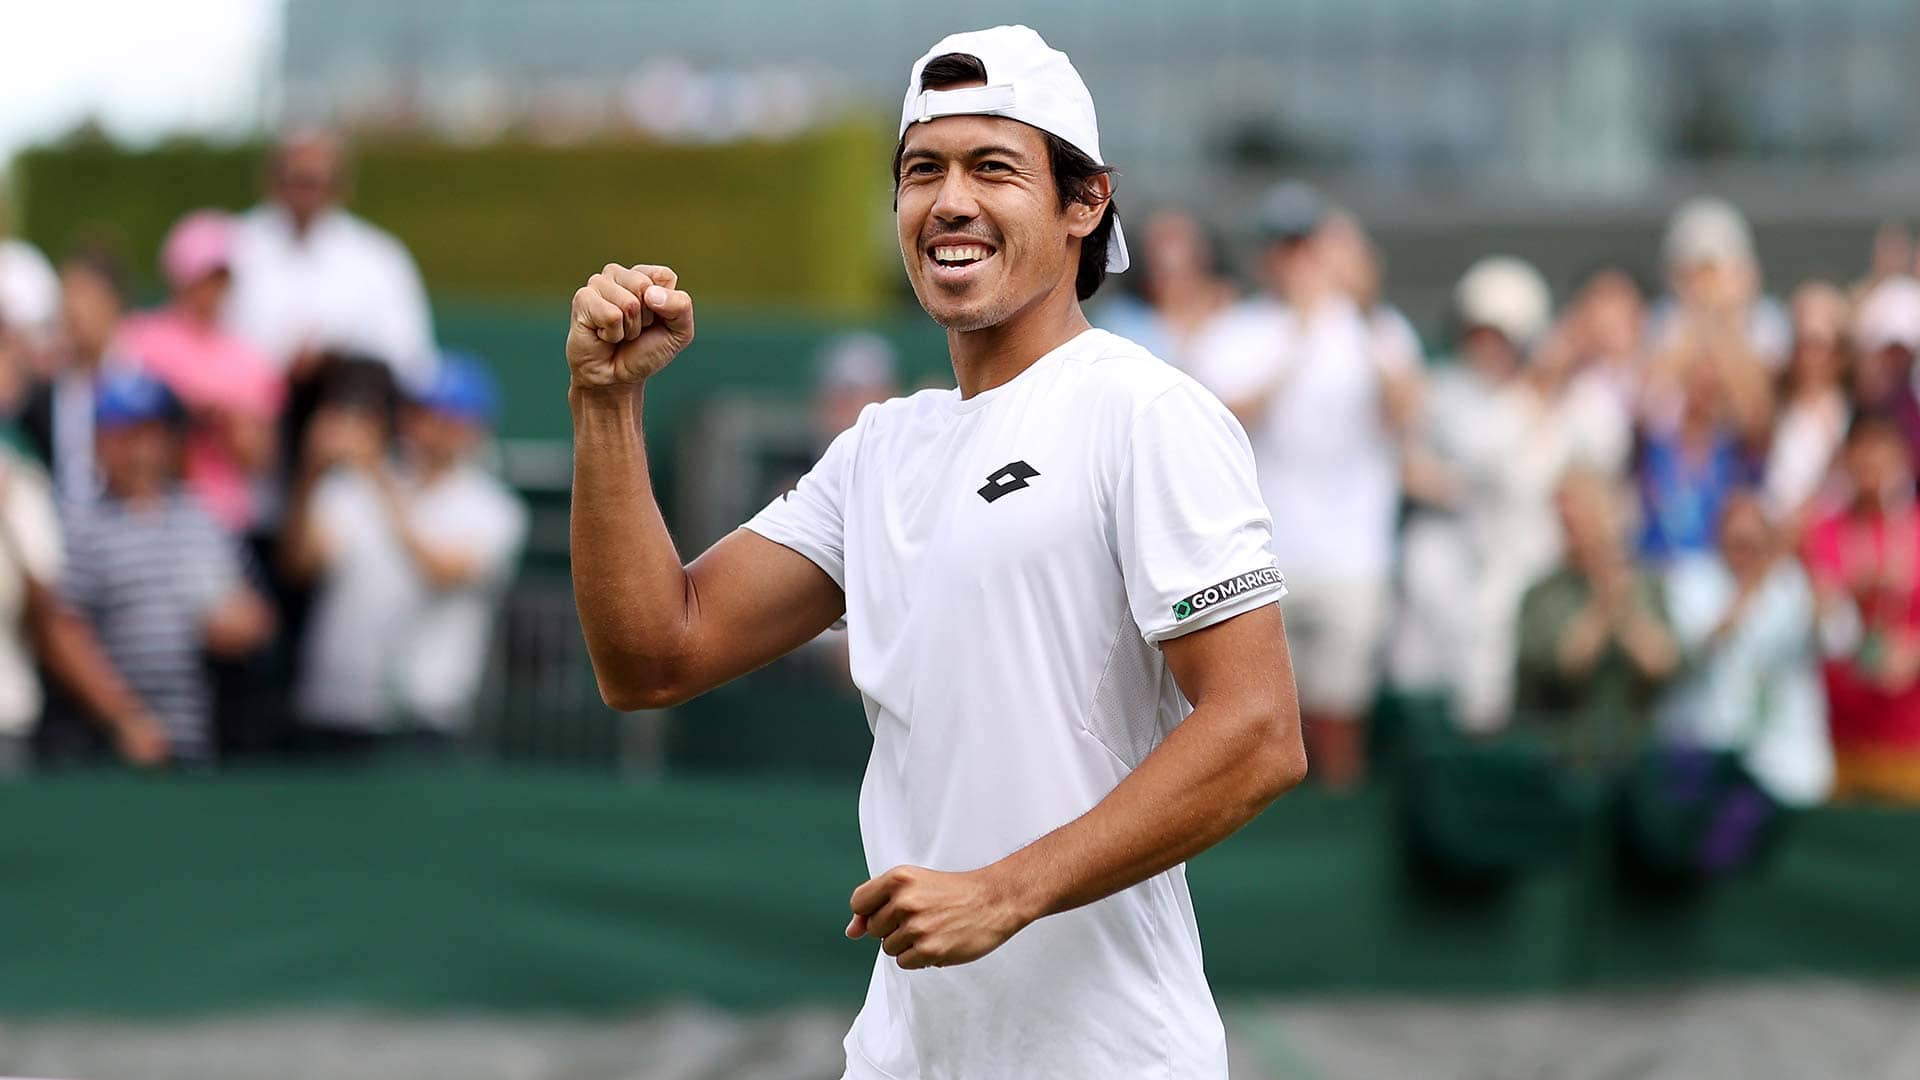 Jason Kubler is into the fourth round at a Grand Slam for the first time here at Wimbledon.